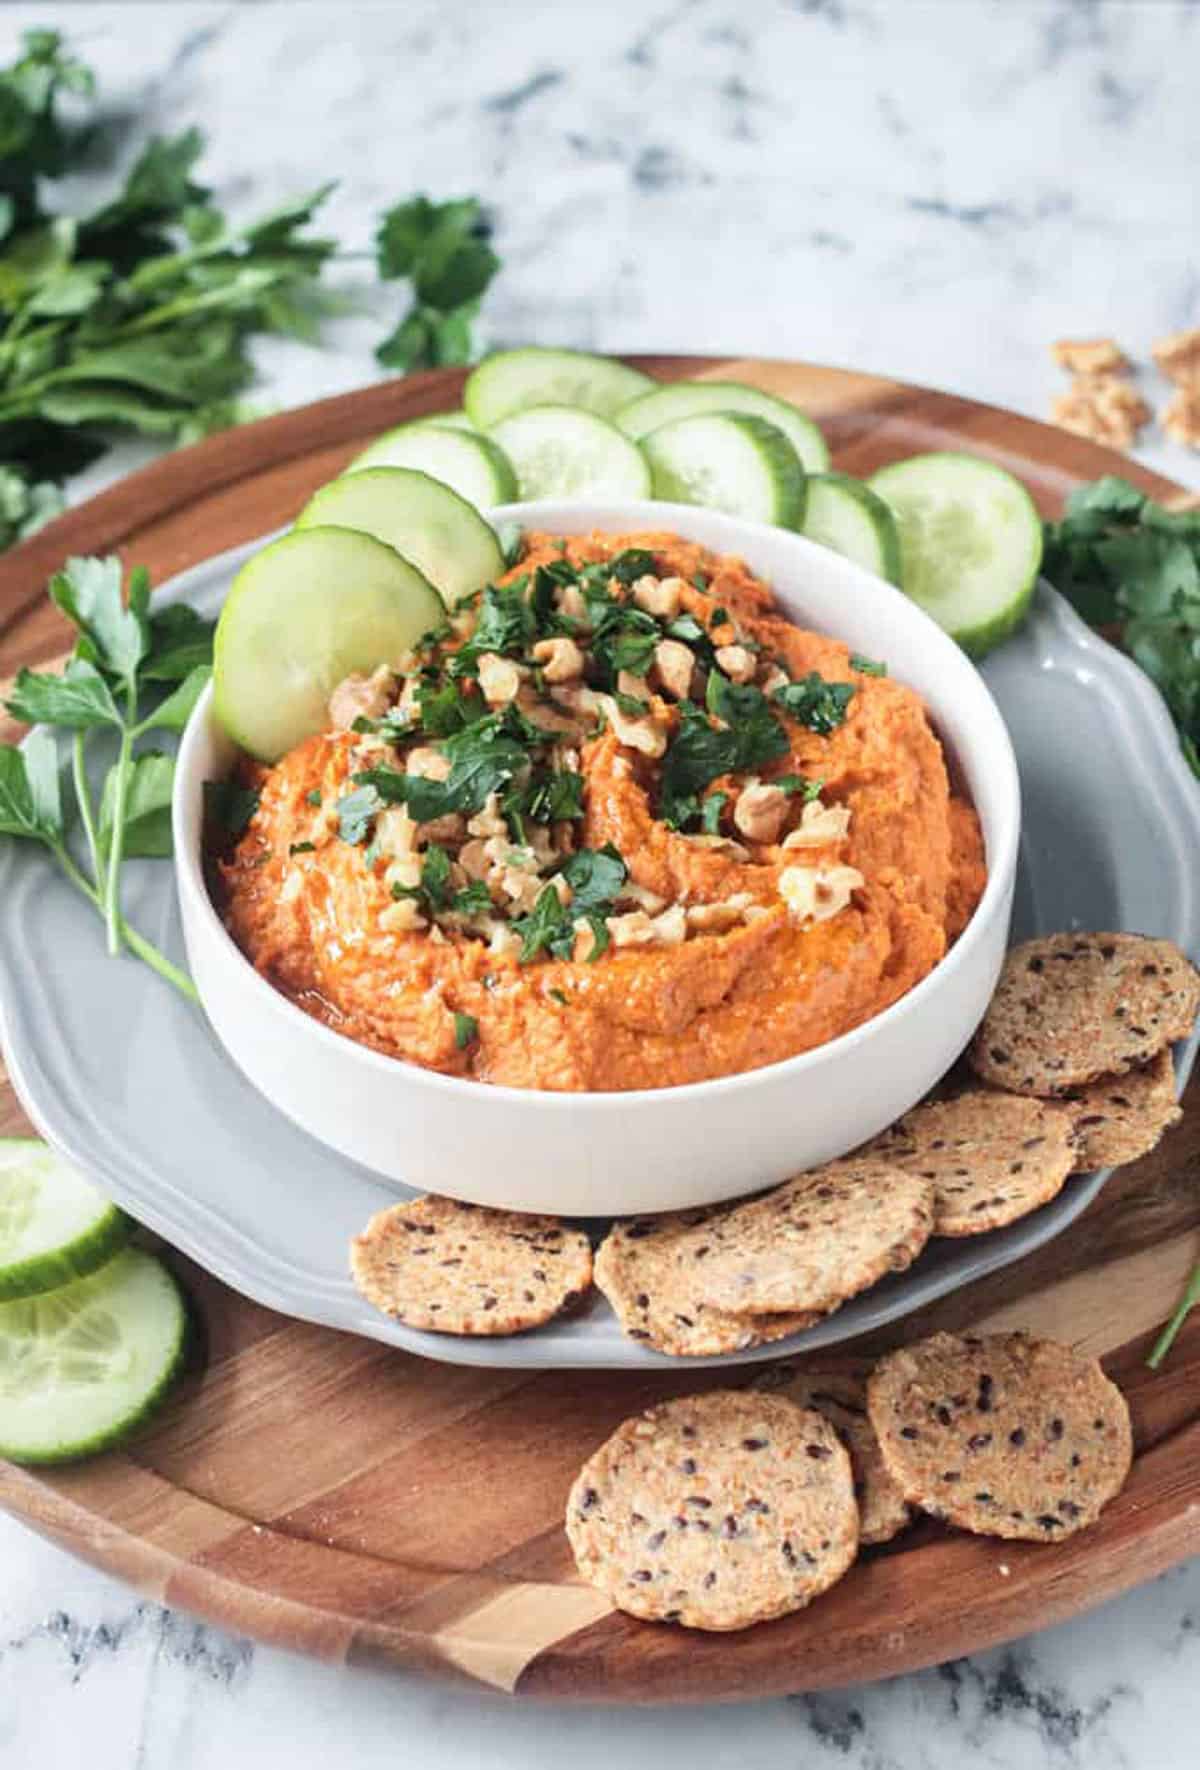 Orange hued dip in a white bowl topped with chopped fresh parsley.